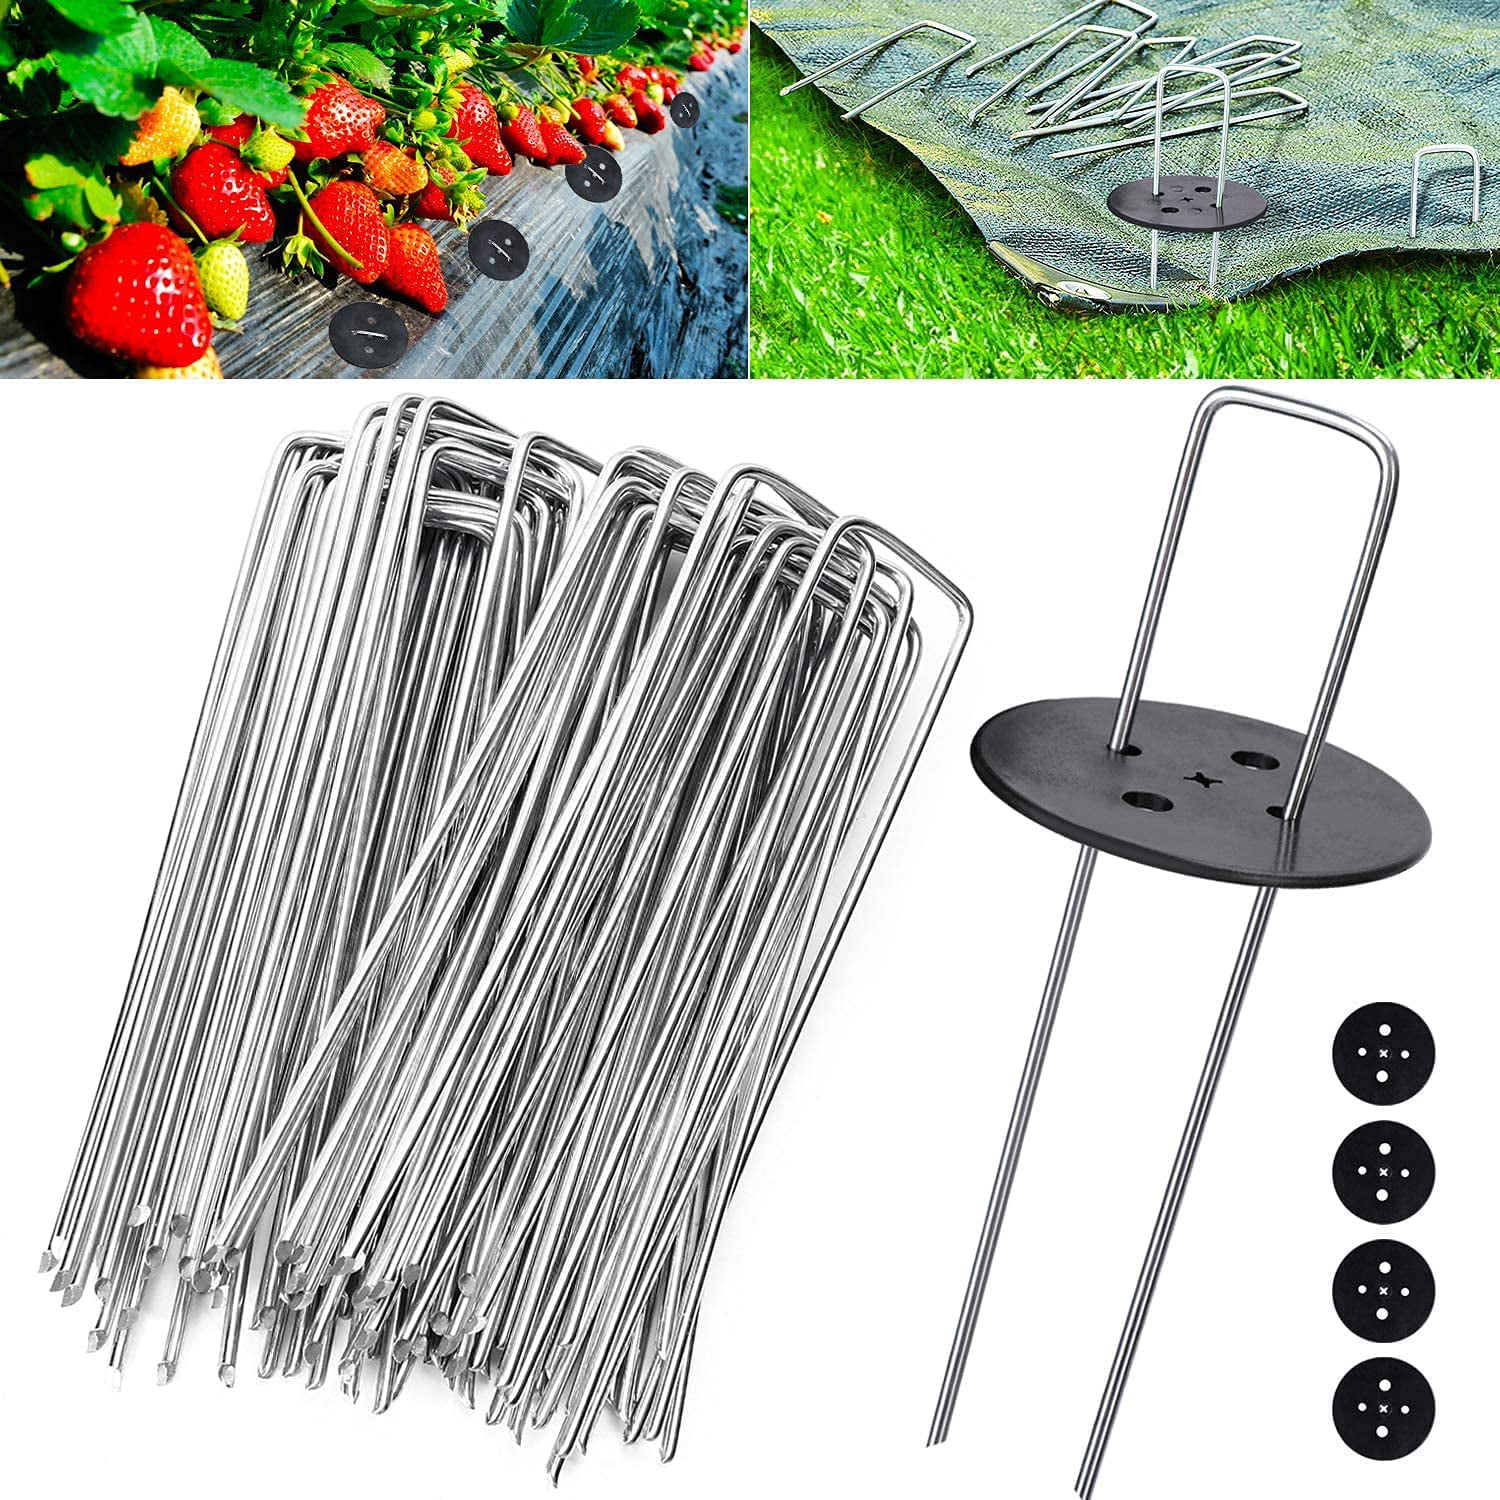 U Shape Garden Stakes 25 Sets Garden Landscape Staples Stakes Pins with Buffer Washer for Securing Fabric 2.5mm*15cm 